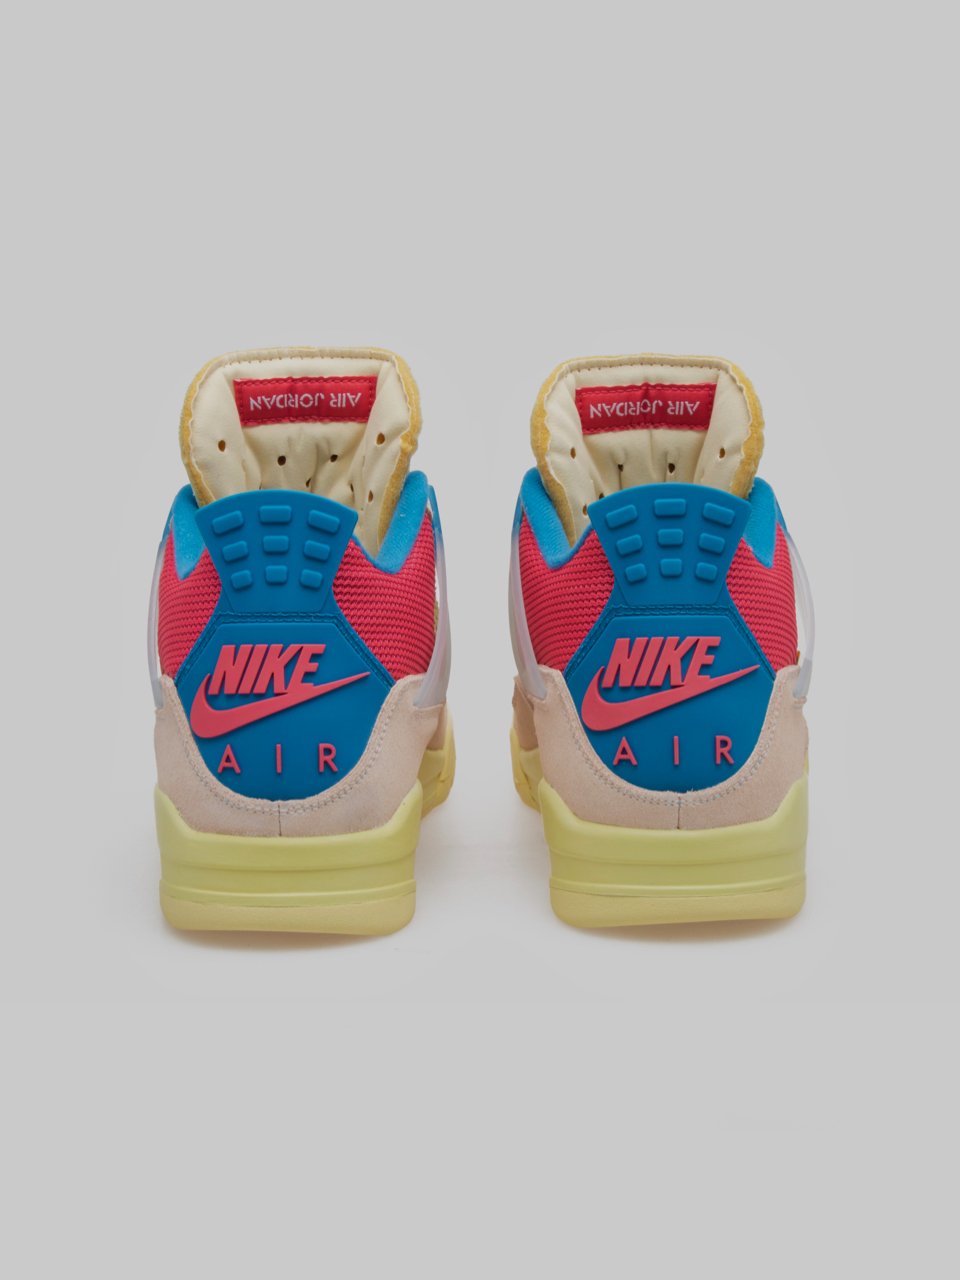 How to Cop Air Jordan 4 UNION Guava Ice DC9533-800 Releases